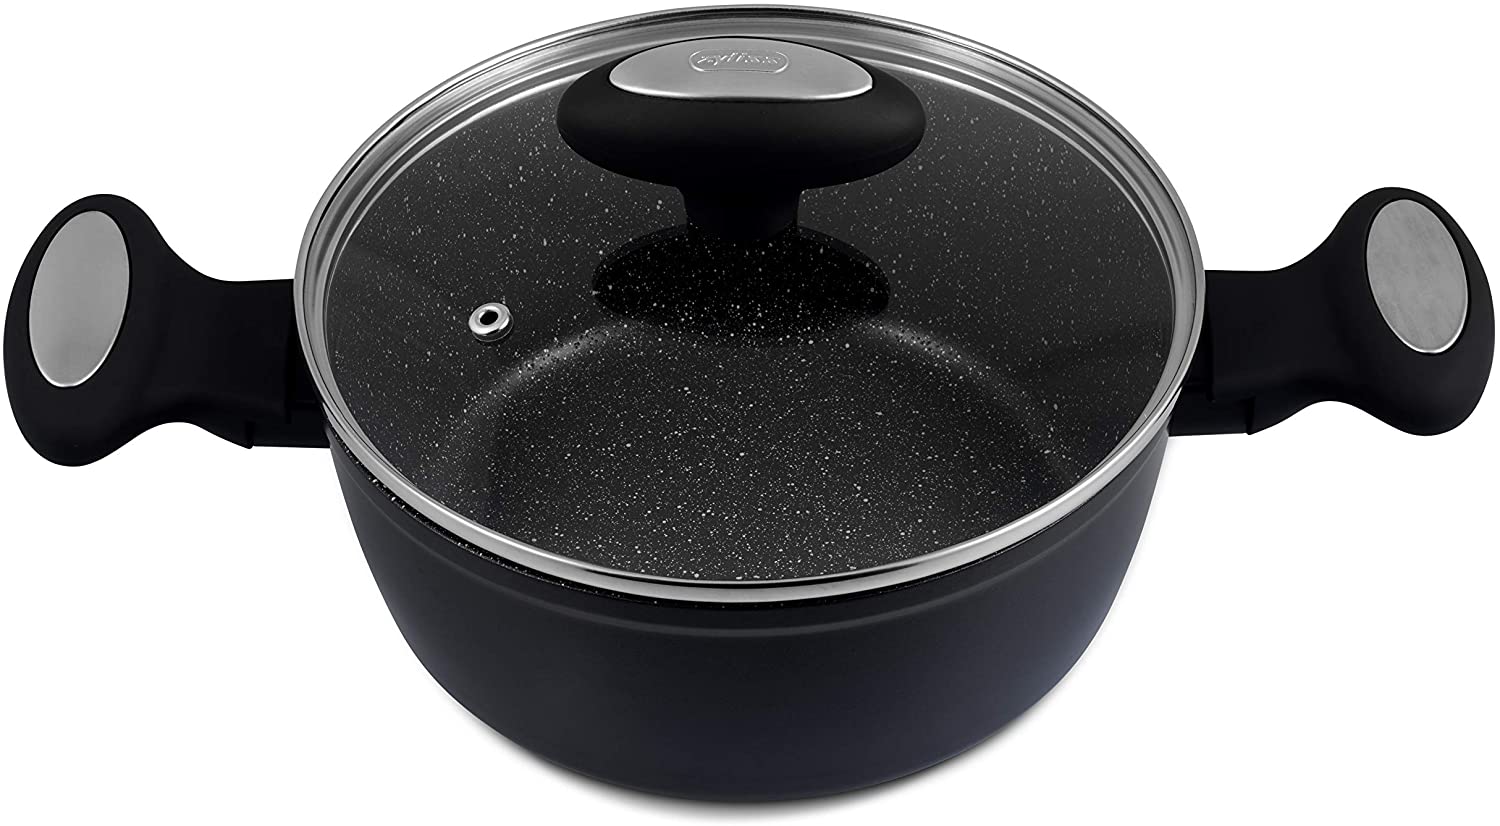 Zyliss E980141 Cook Non-Stick Coating Pots, Forged Aluminium, Bakelite, Soft Touch, SS, Black